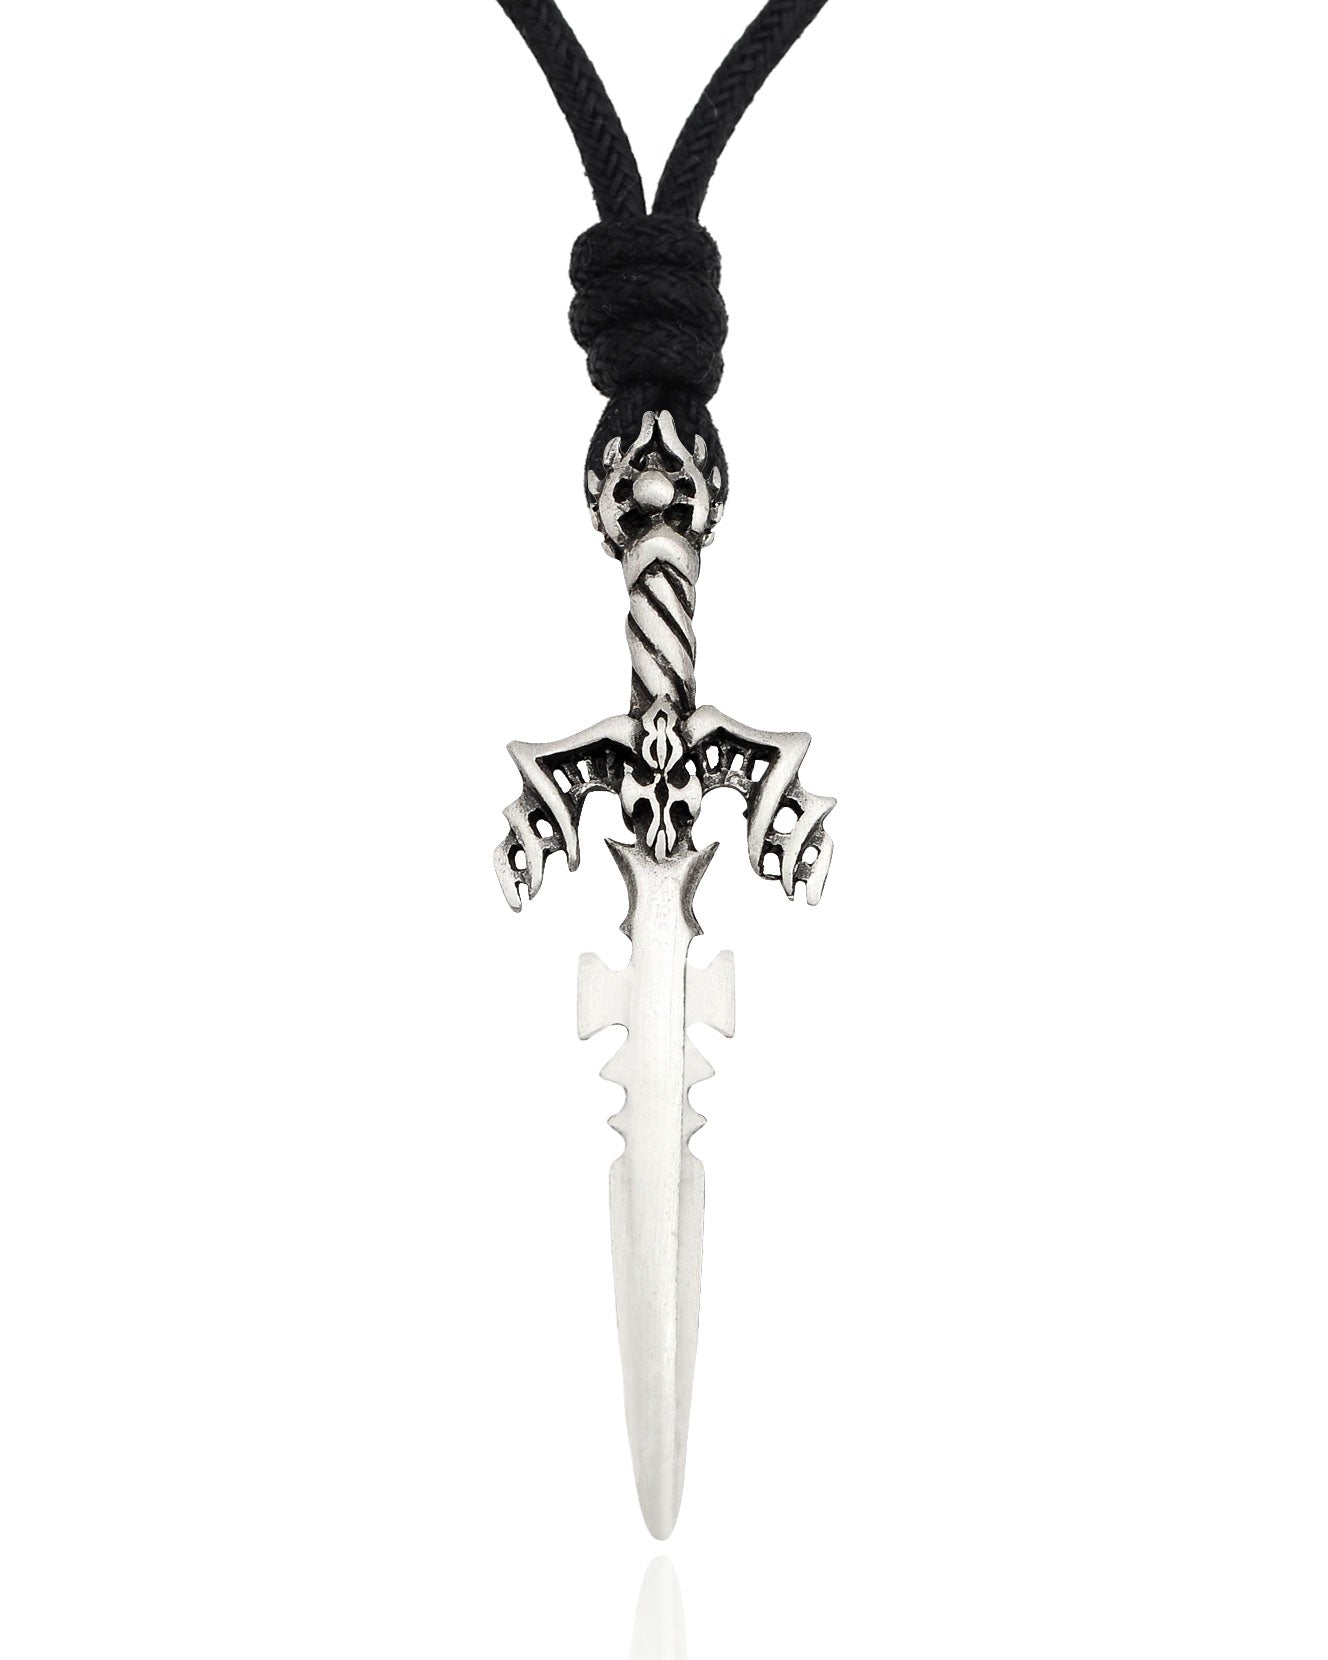 Battle Knight Amor Sword Silver Pewter Charm Necklace Pendant Jewelry